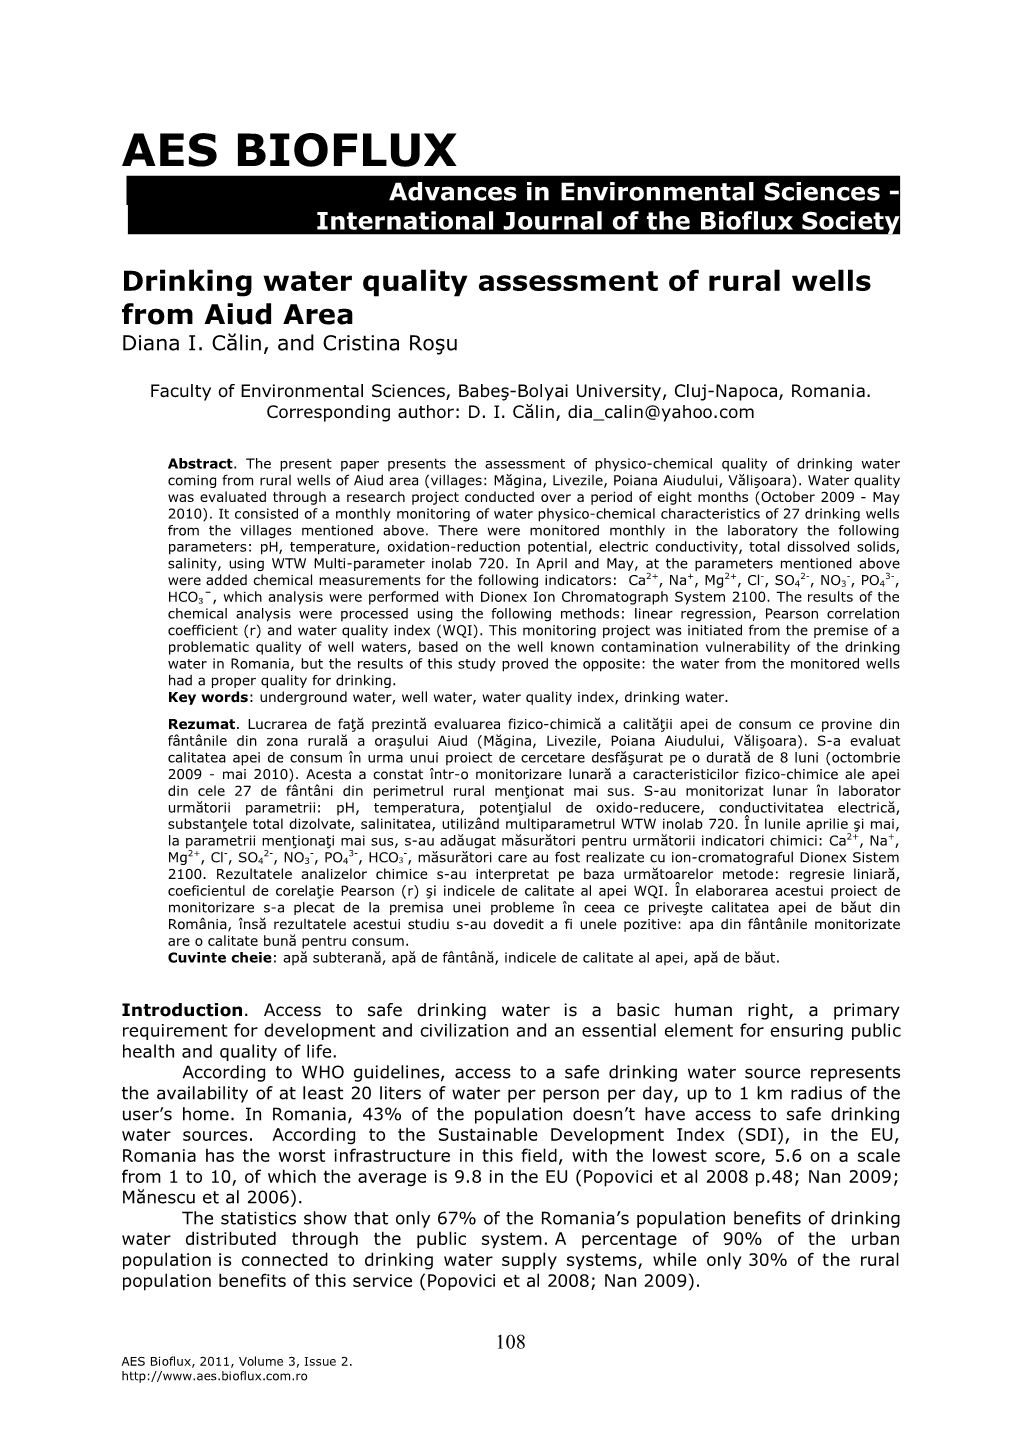 Calin D. I., Rosu C., 2011 Drinking Water Quality